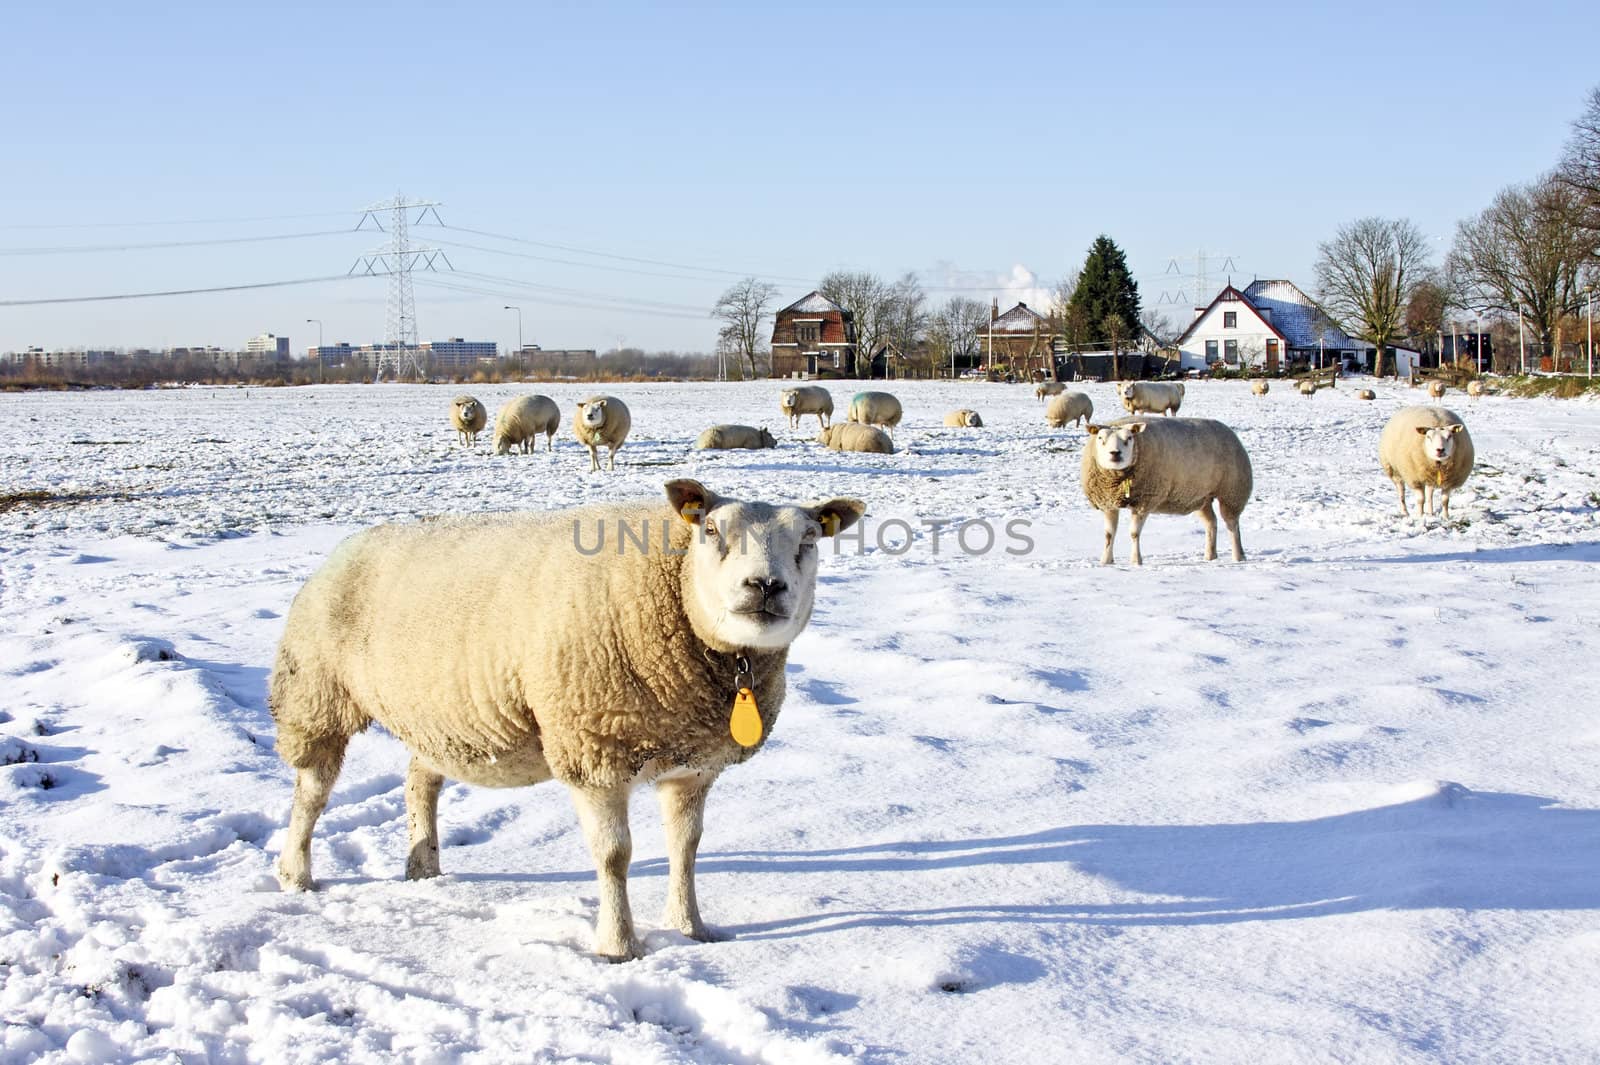 Wintertime in the countryside from the Netherlands by devy